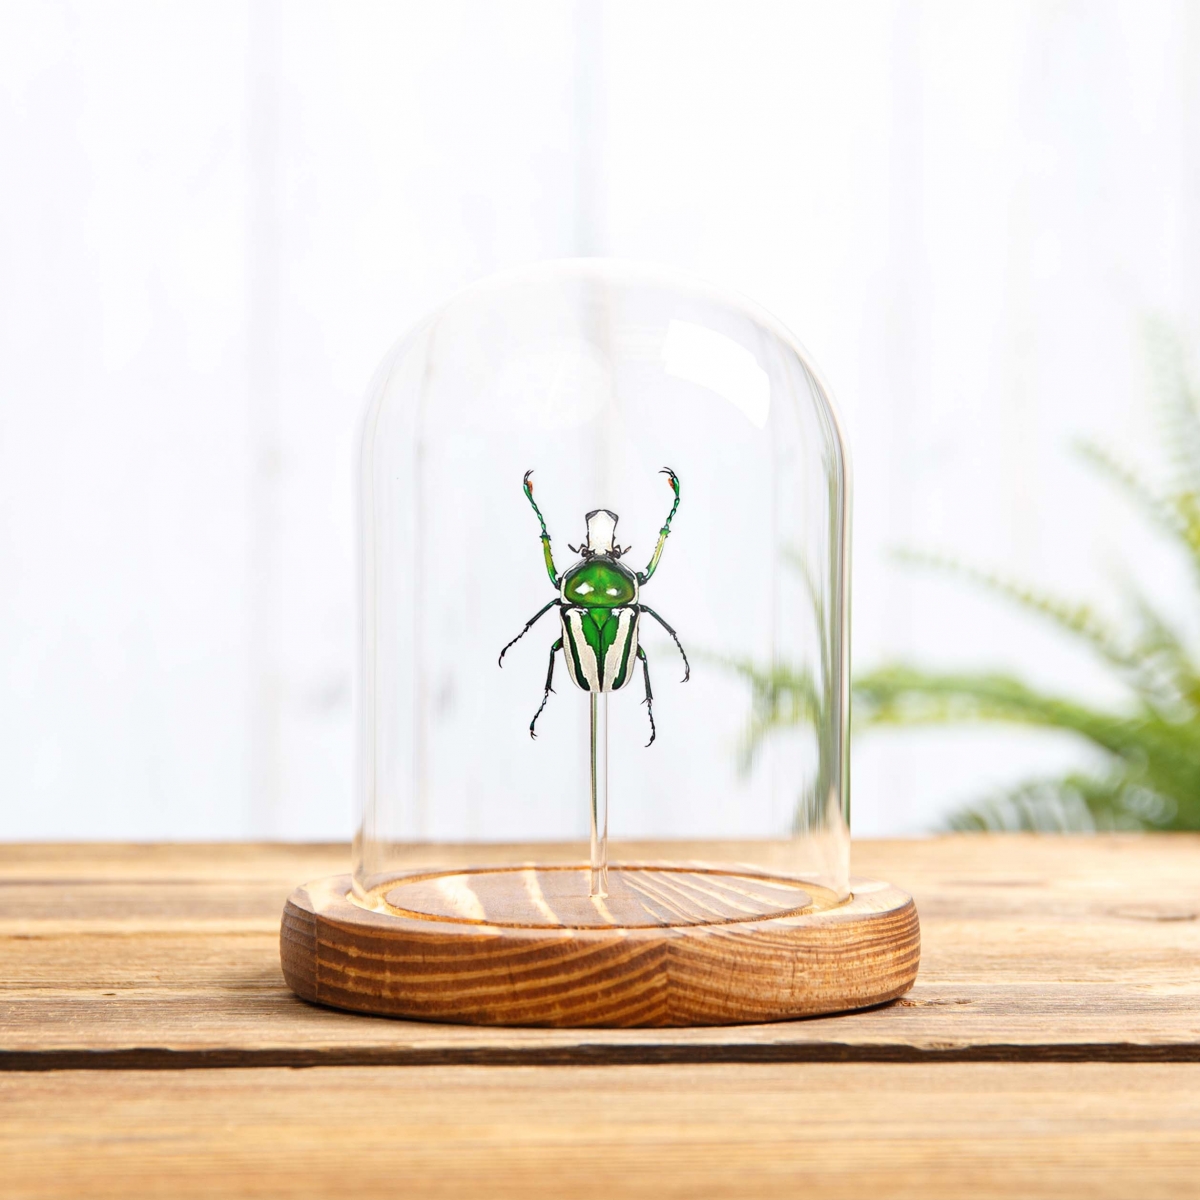 Green Scarab Beetle in Glass Dome with Wooden Base (Ranzania splendens)